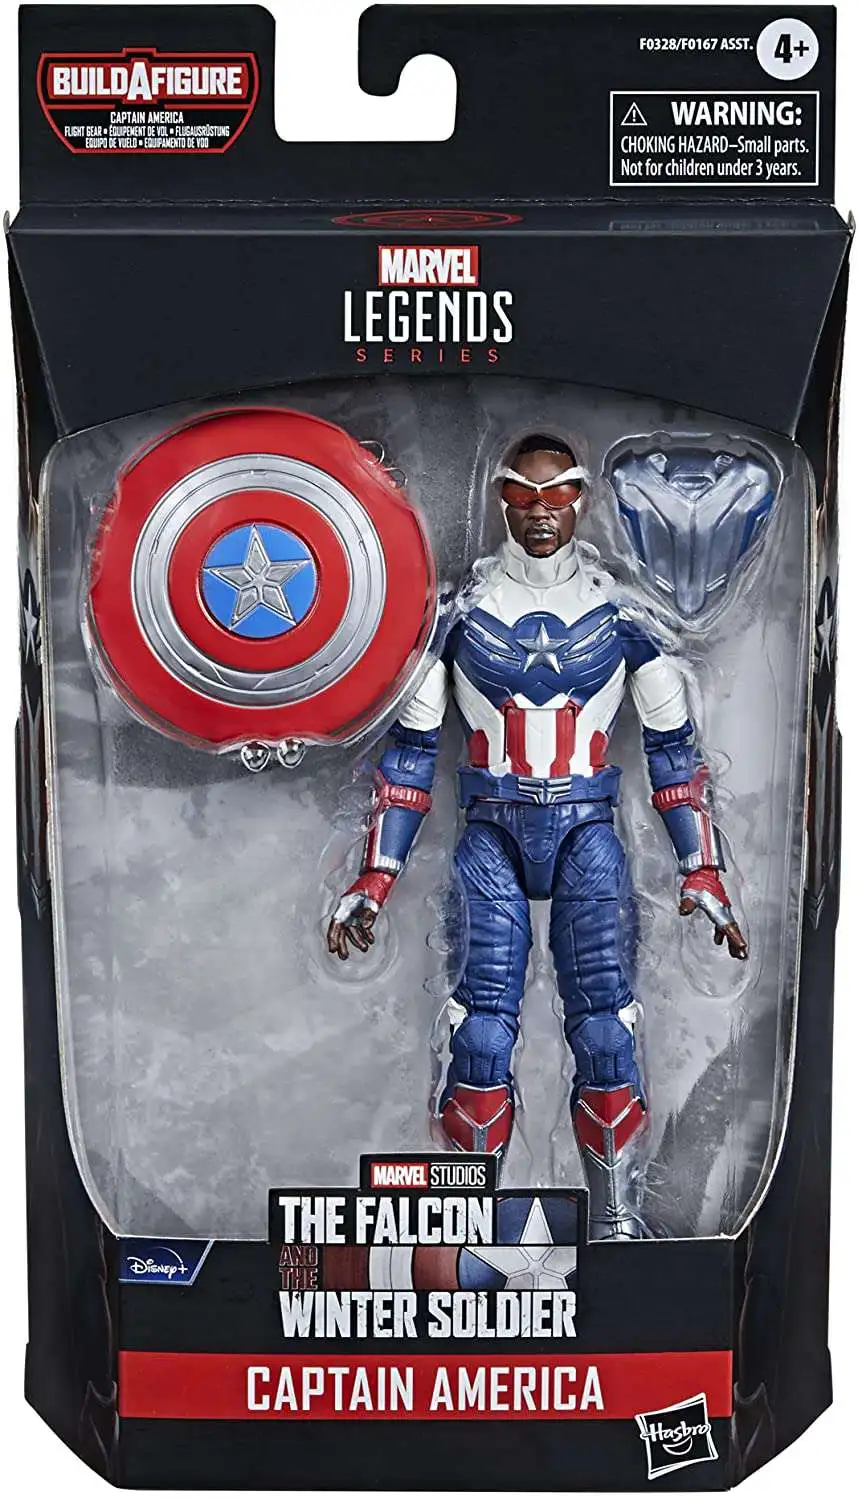 MARVEL SELECT CAPTAIN AMERICA 2 The WINTER SOLDIER MOVIE ACTION FIGURES KIDS TOY 